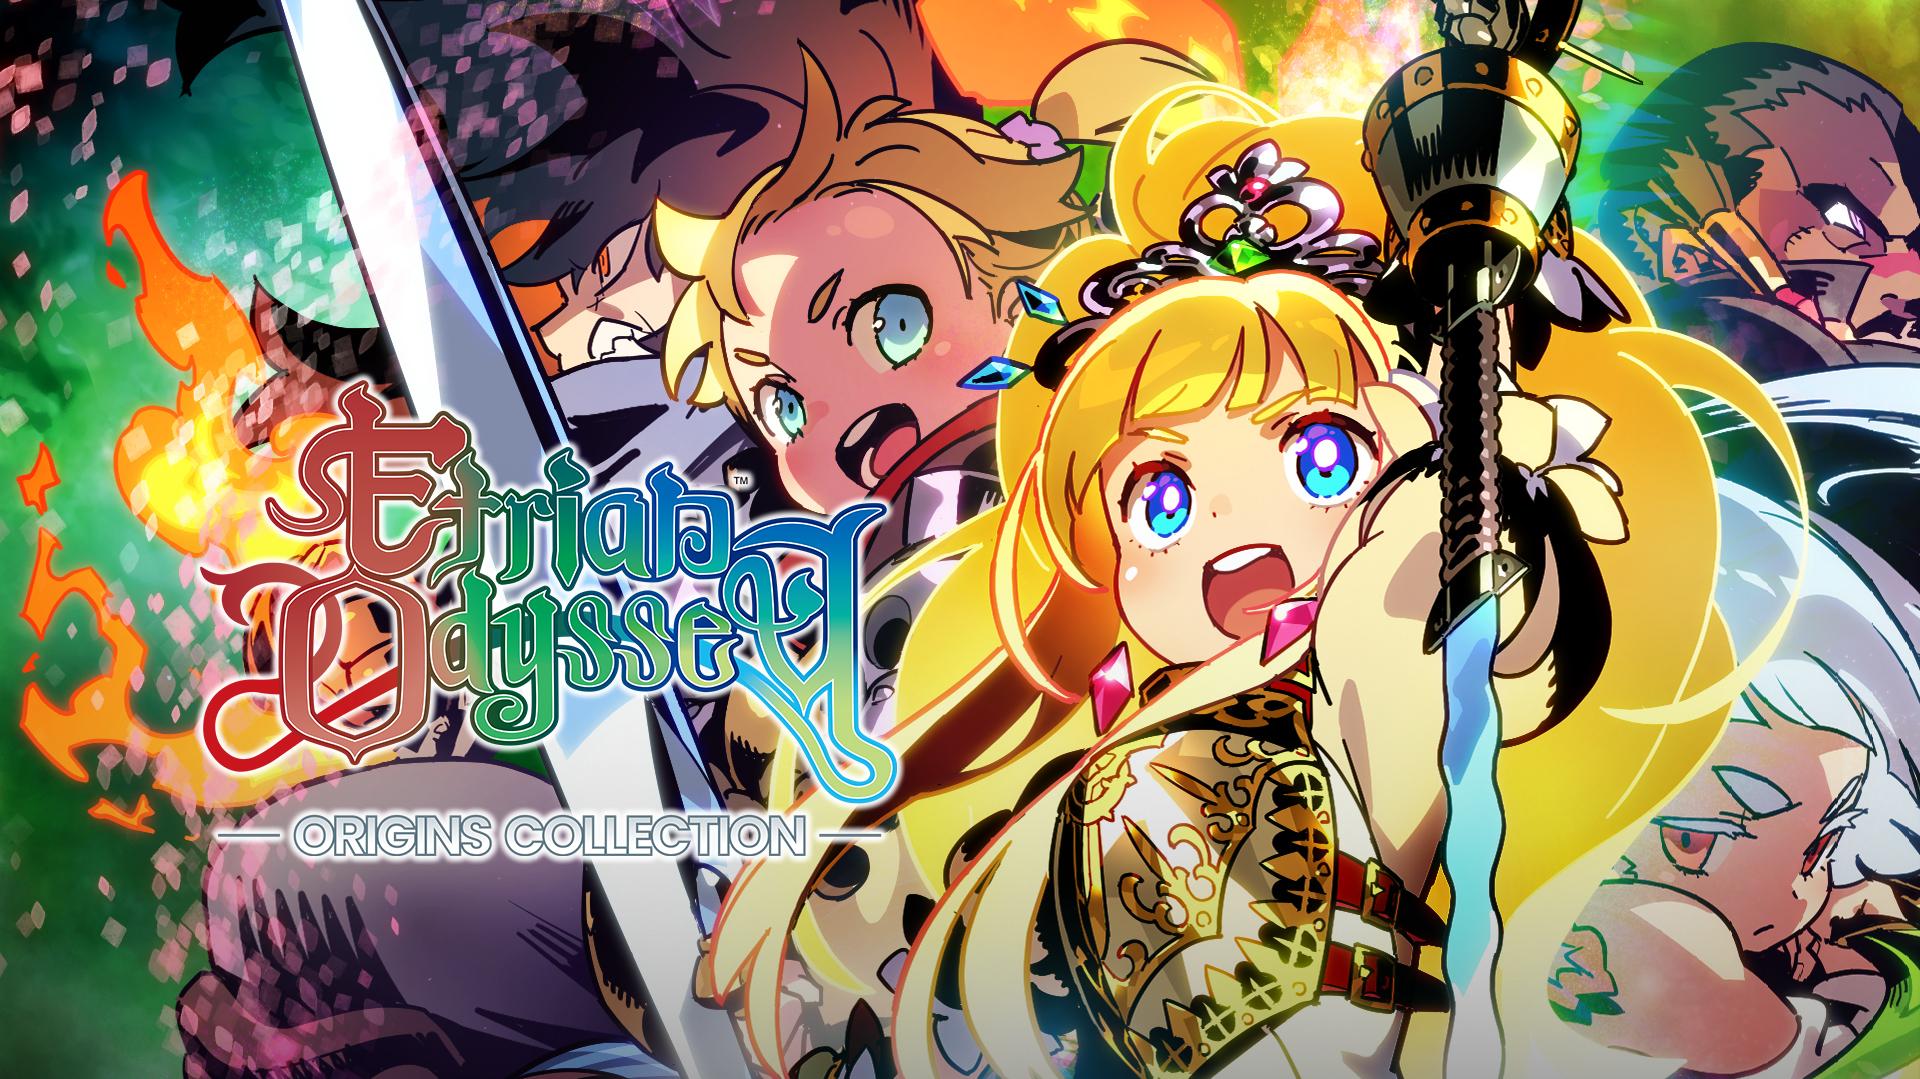 Etrian Odyssey Origins Collection launches this summer